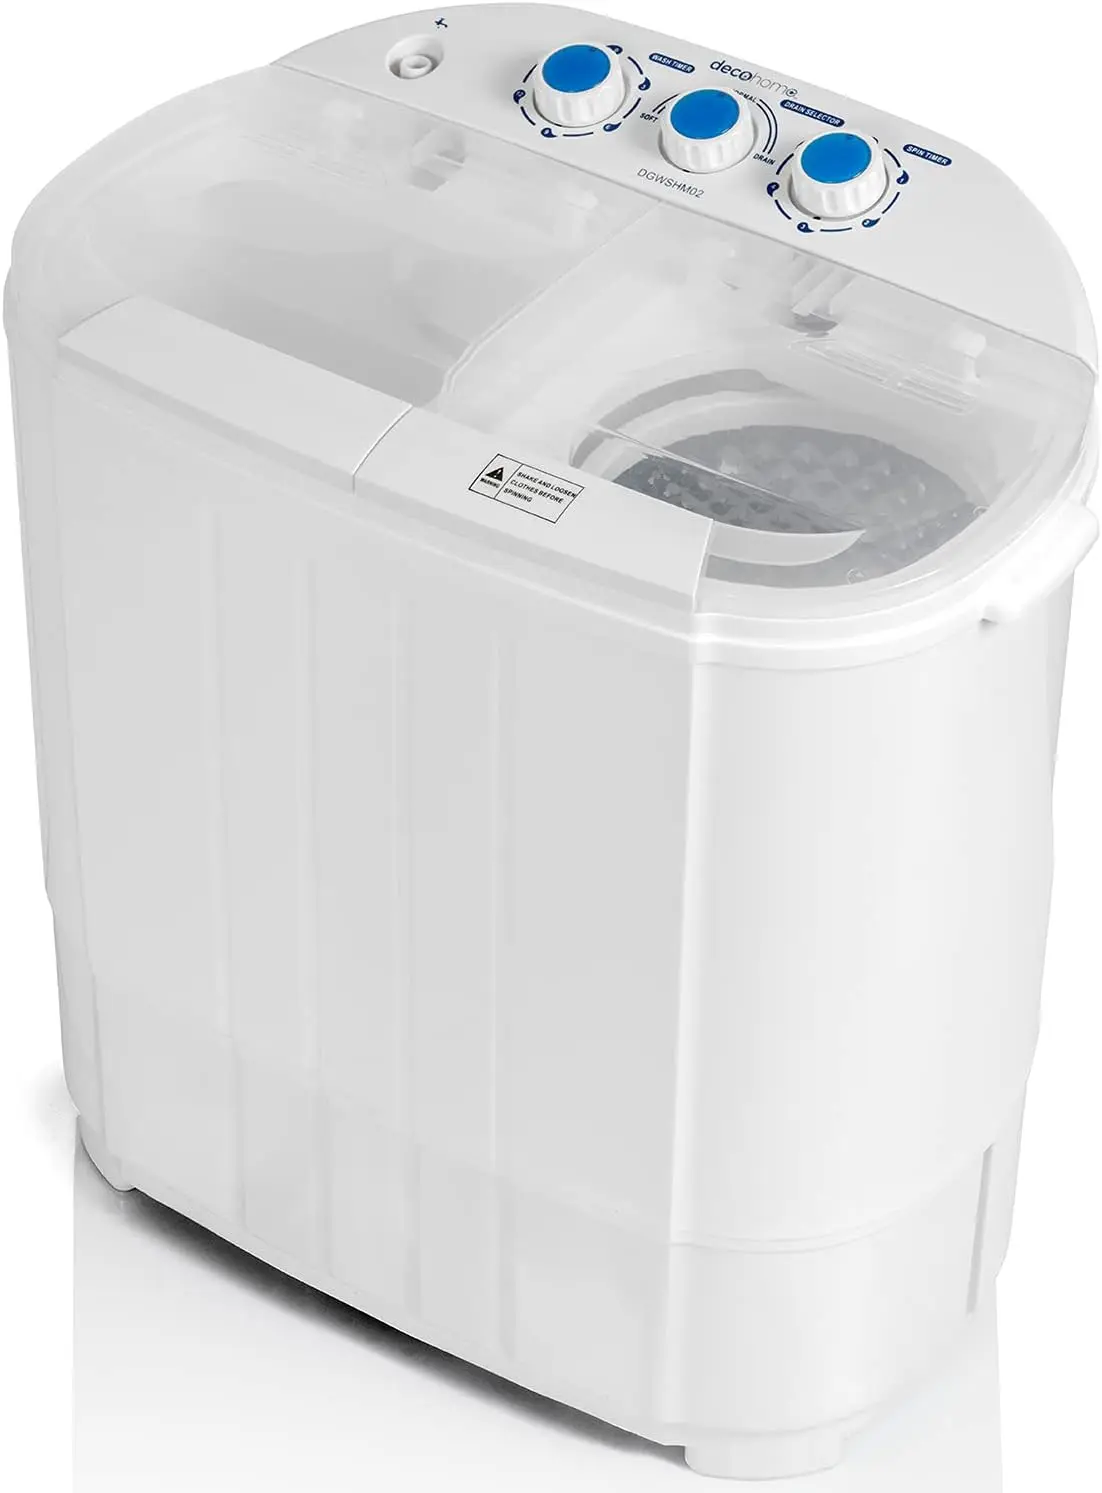 Compact Washing Machine with Twin Tub for Wash and Spin Dry, Portable, B... - $484.16